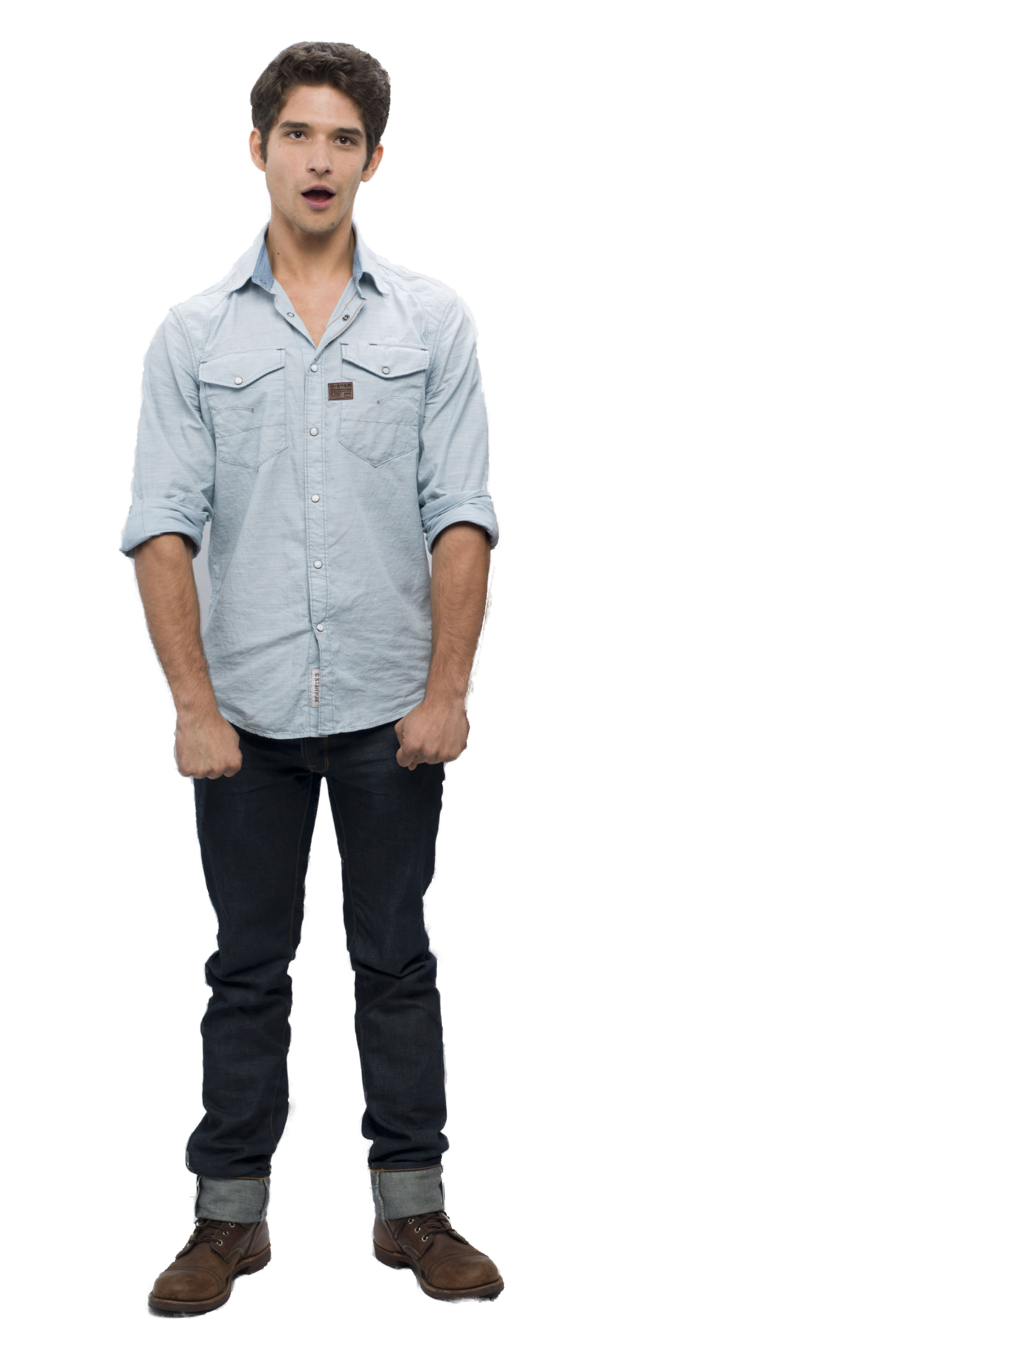 Tyler Posey Png by XxPrettyxX